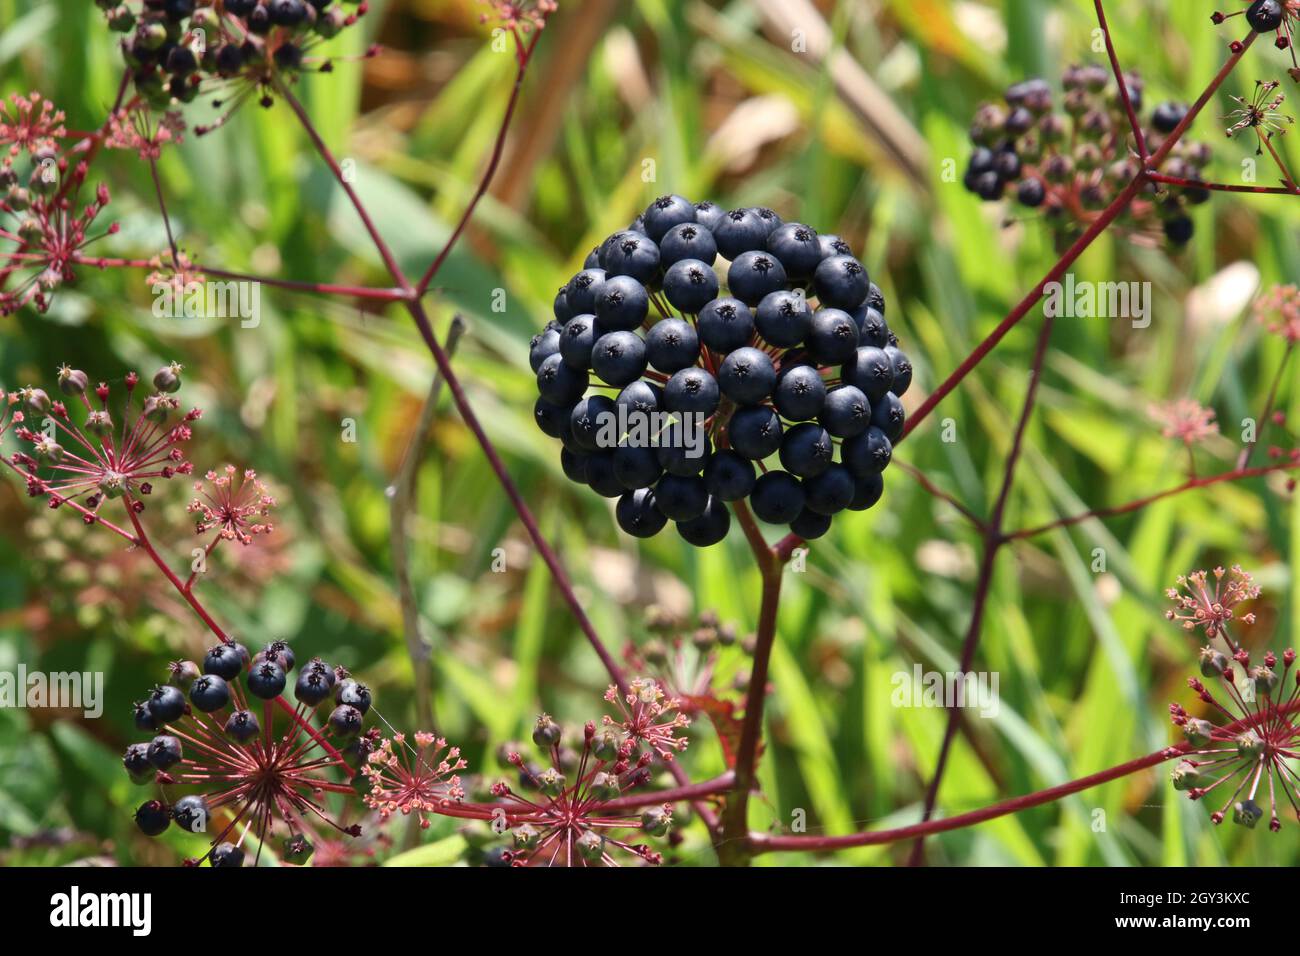 A black seed head on the top of a stalk with green leaves and grass out of focus in the background. Stock Photo